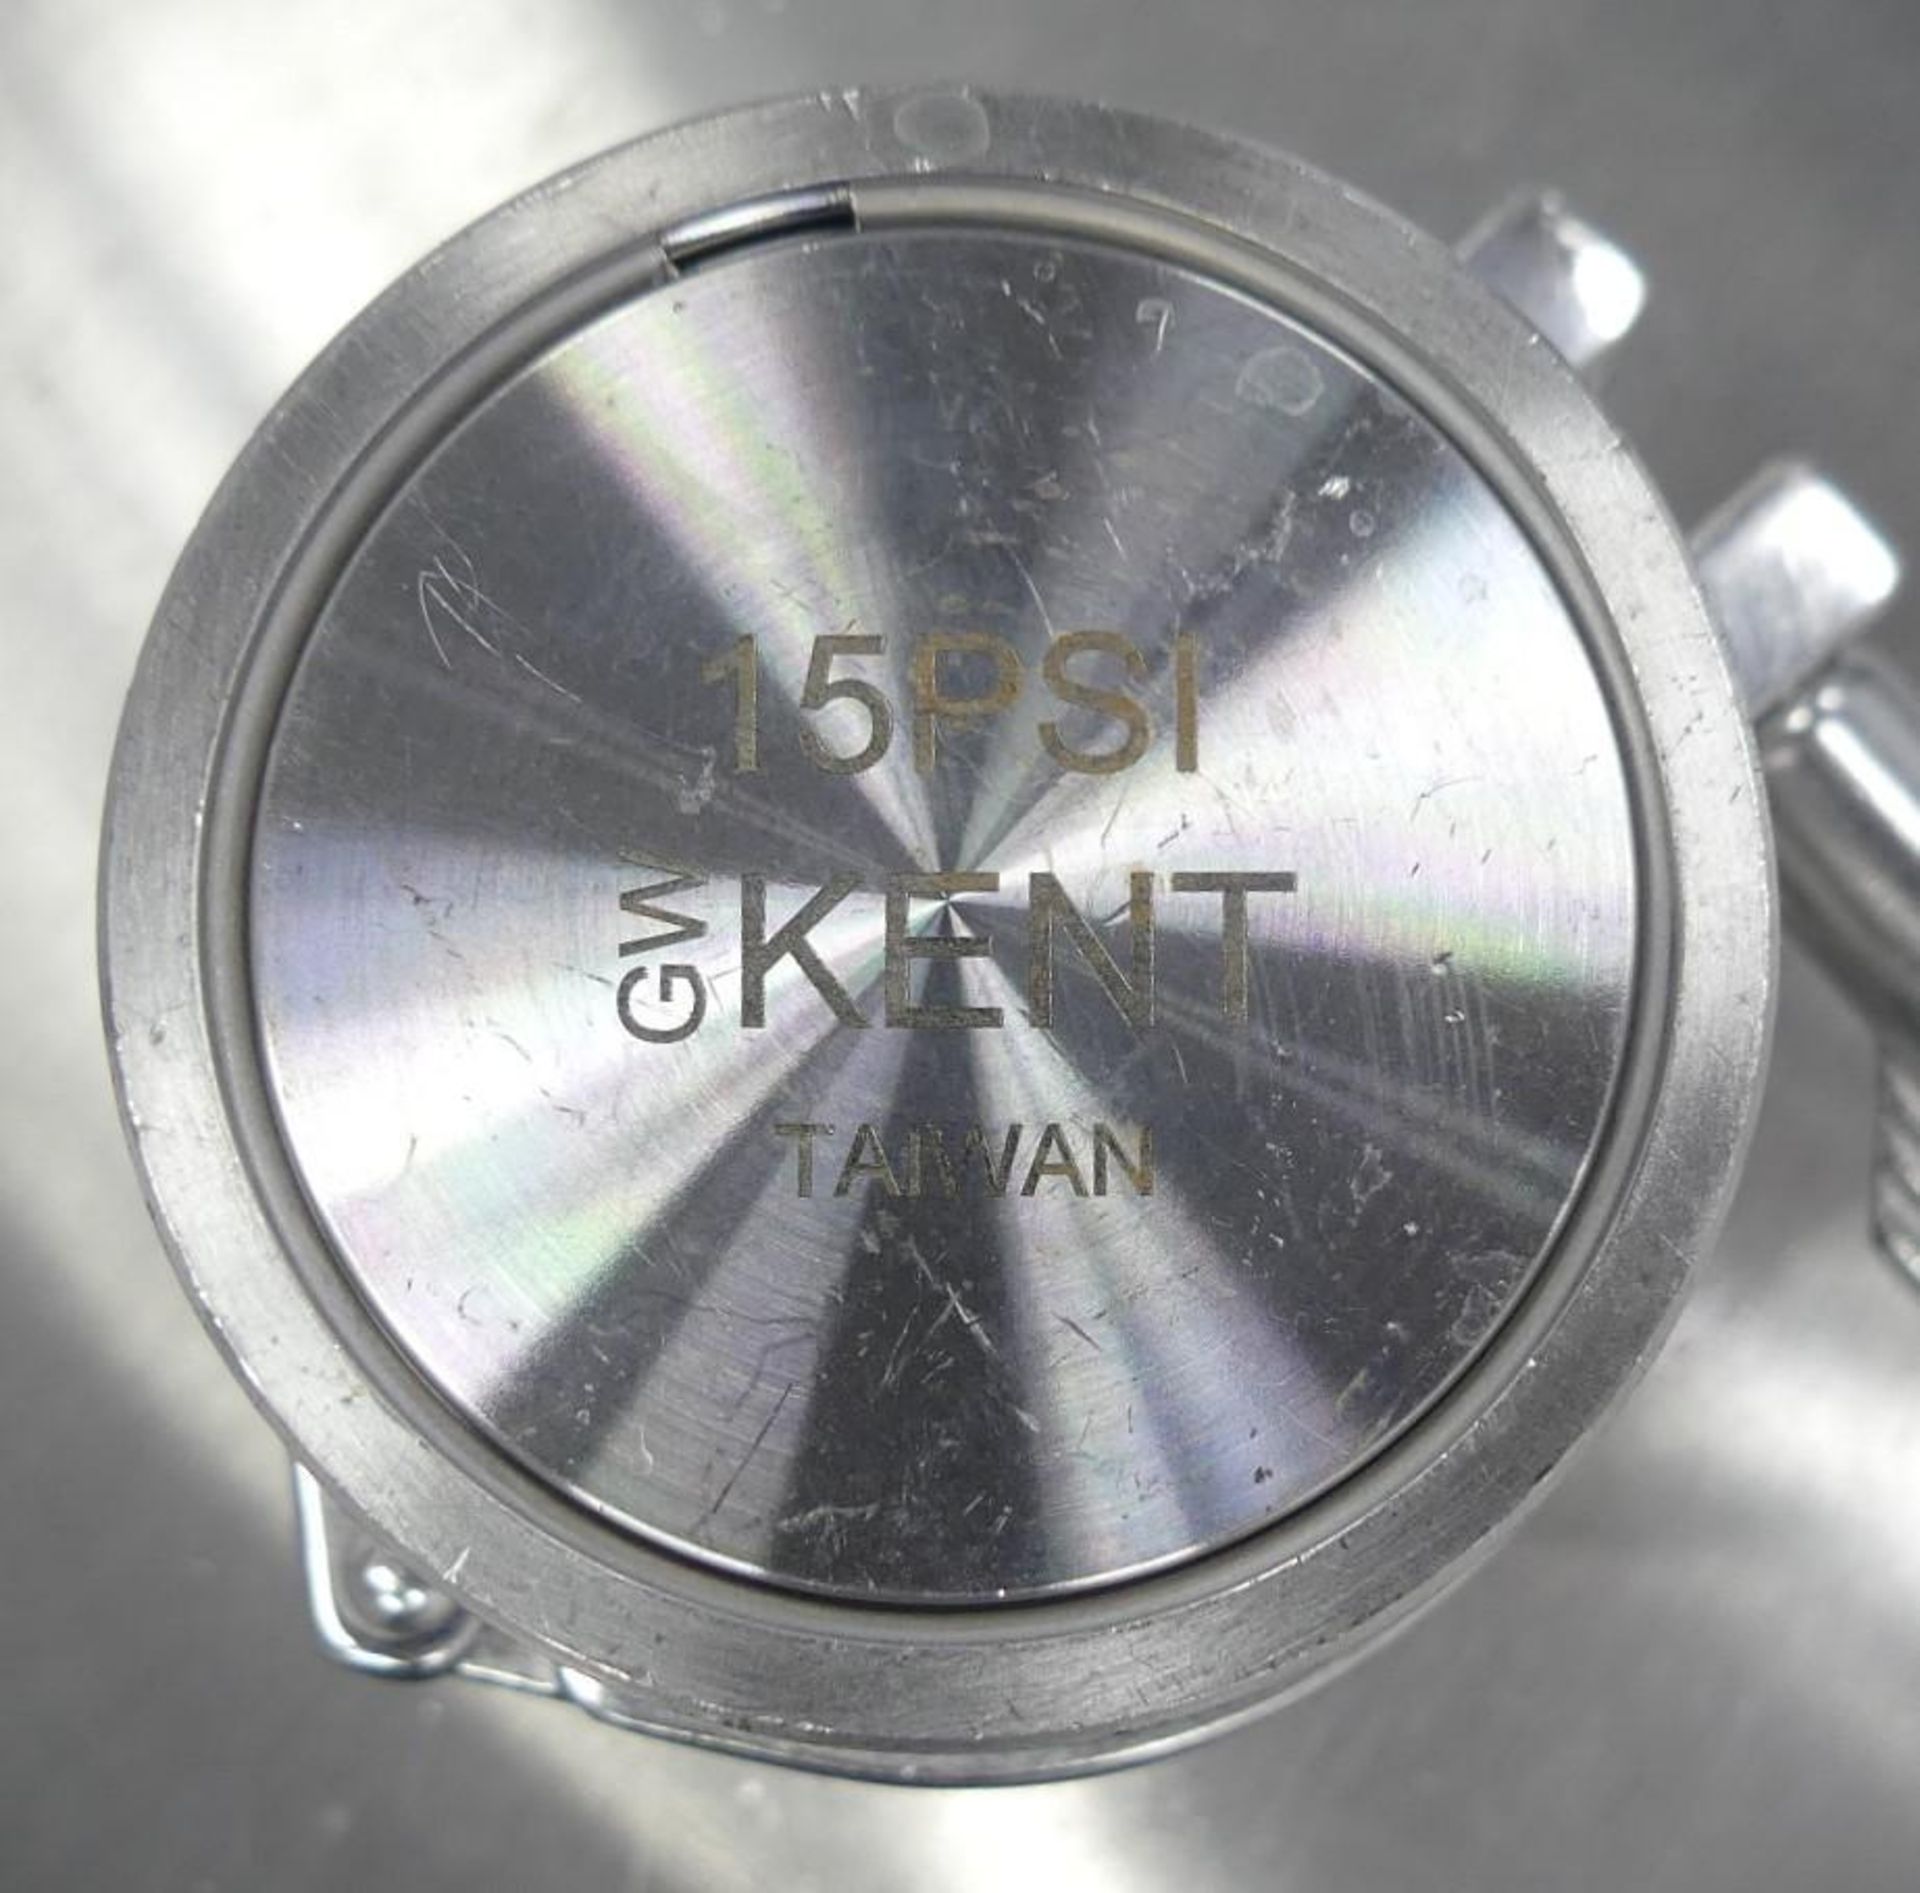 2015 Kent GW Stainless Steel Jacketed Brite Tank - Image 11 of 16